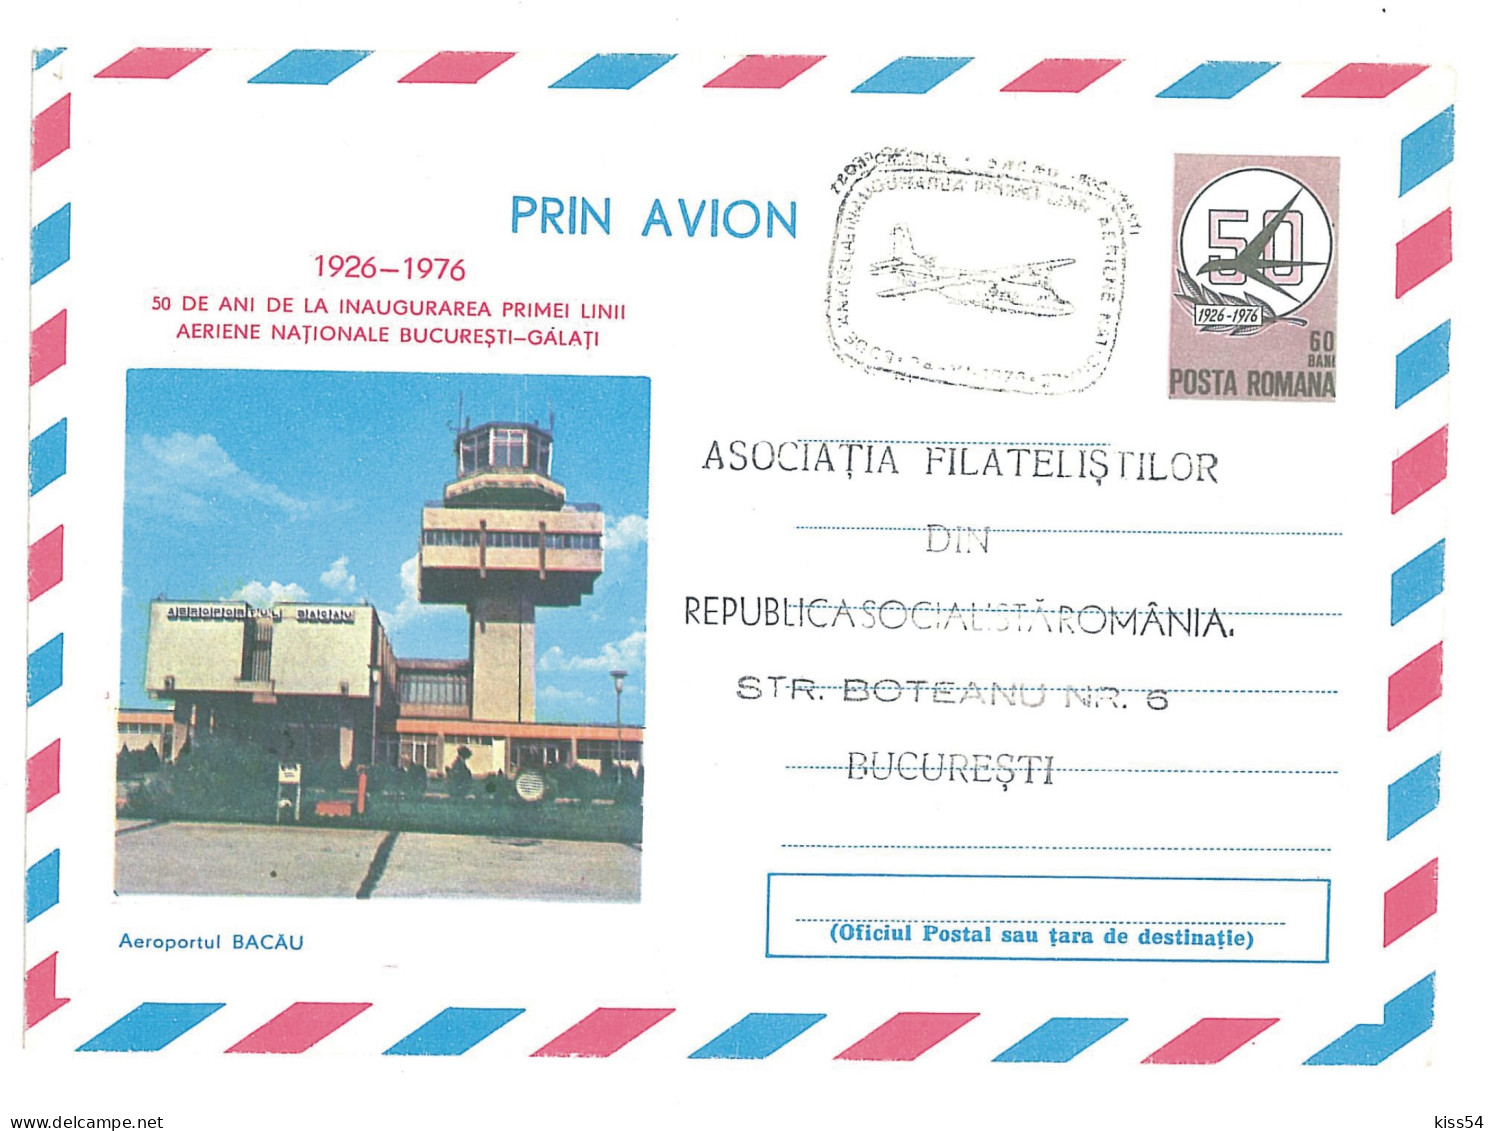 IP 76 - 082 AIRPORT, BACAU, Special Cancellation - Stationery - Used - 1976 - Ganzsachen